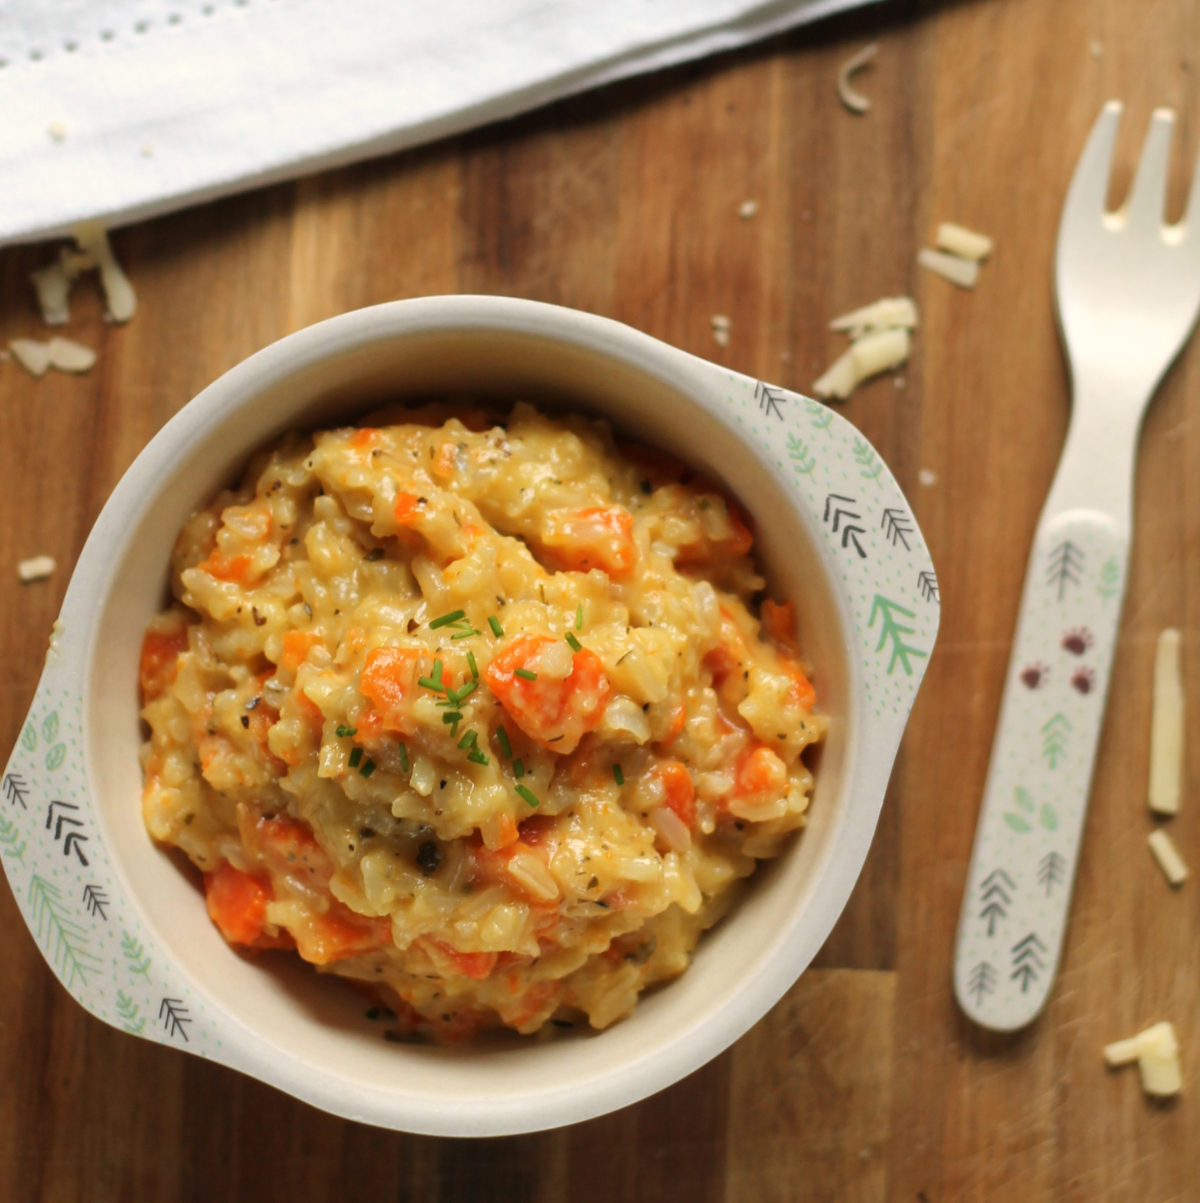 Cheesy Vegetable and Brown Rice Pot for Babies